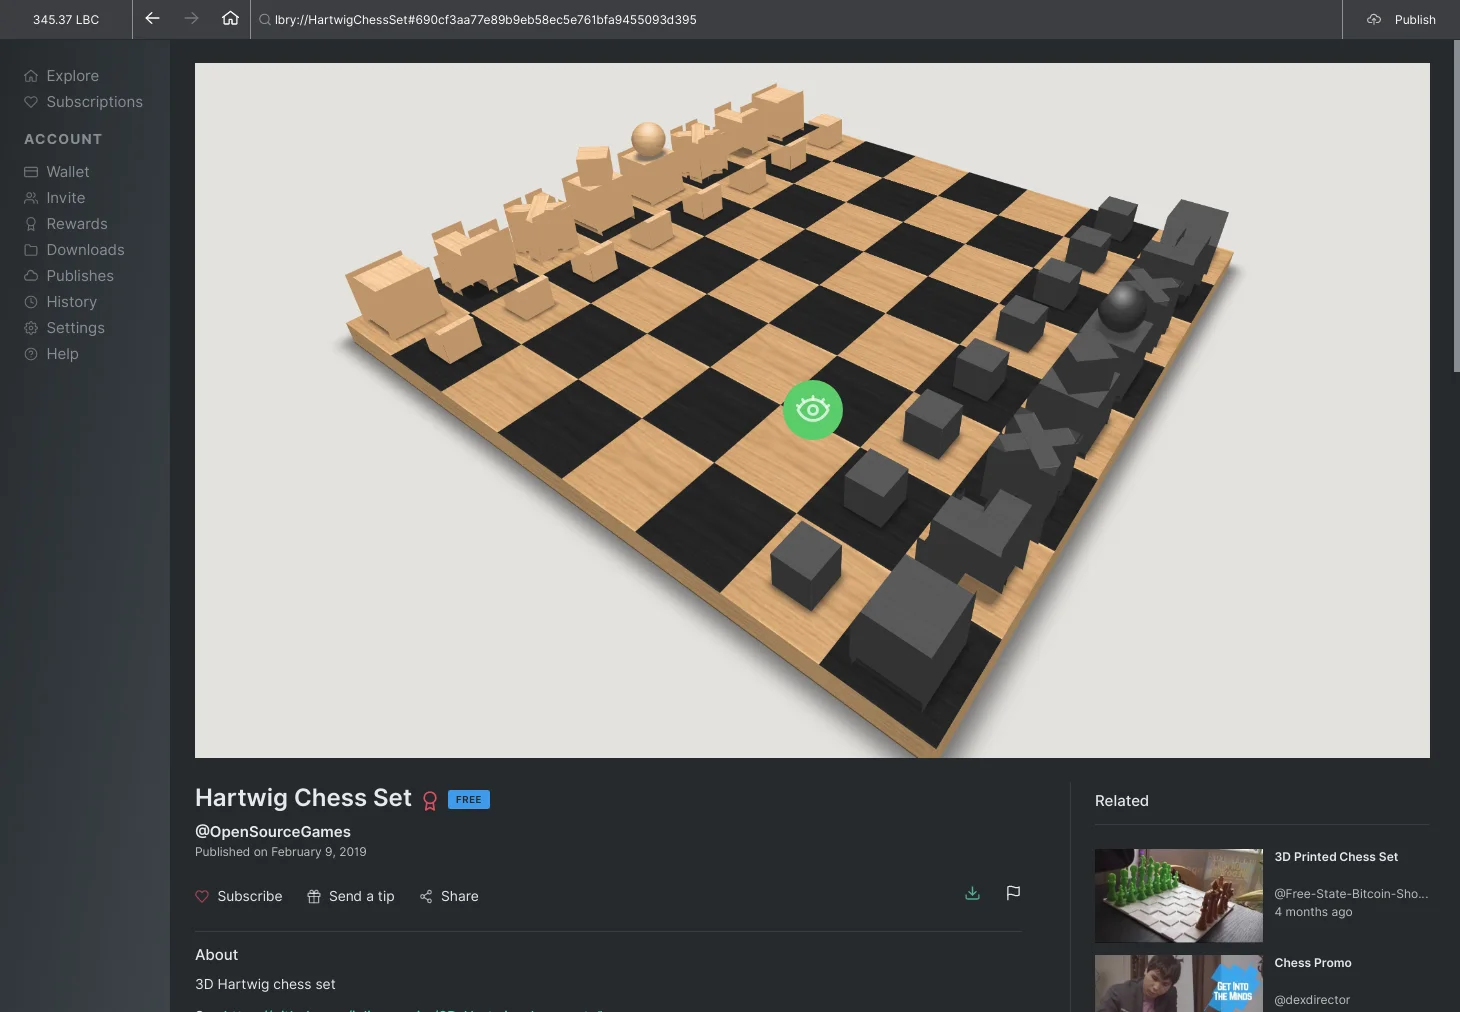 Hartwig Chess Set, an open source chess game available on LBRY and Github.